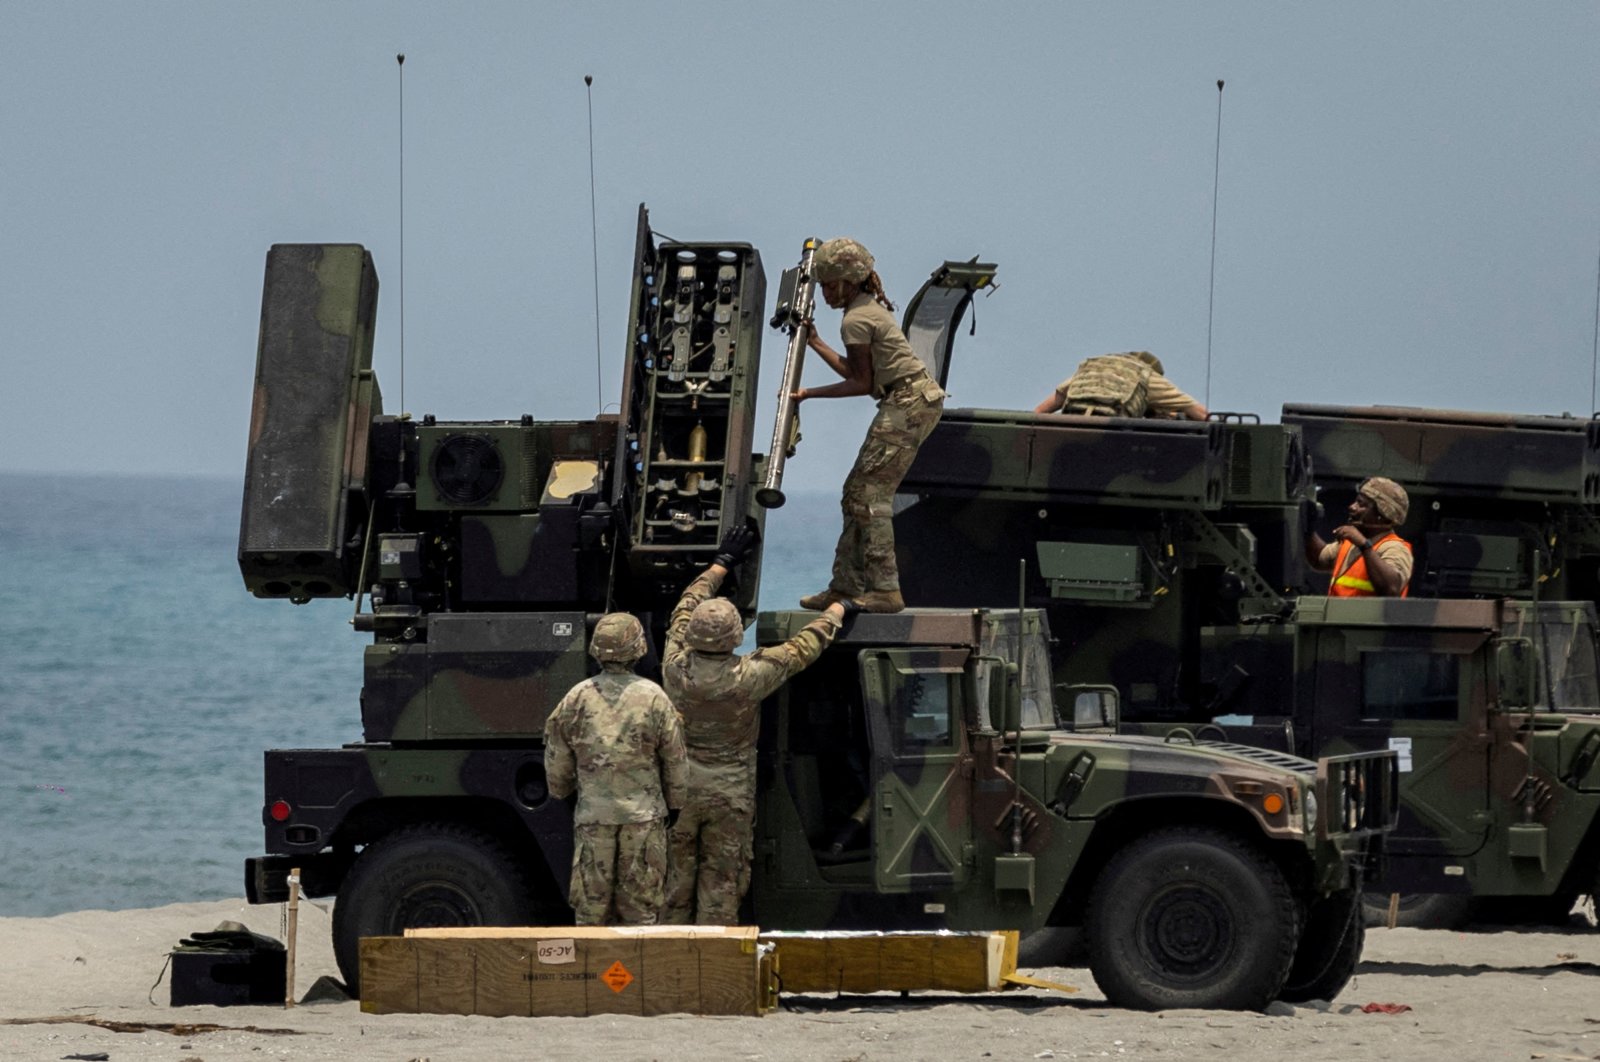 U.S. troops prepare a Stinger missile during a live fire exercise in the annual joint military exercises between U.S. and Philippine troops called &quot;Balikatan&quot; or shoulder-to-shoulder, at a naval base in San Antonio, Zambales province, Philippines, April 25, 2023. (Reuters File Photo)